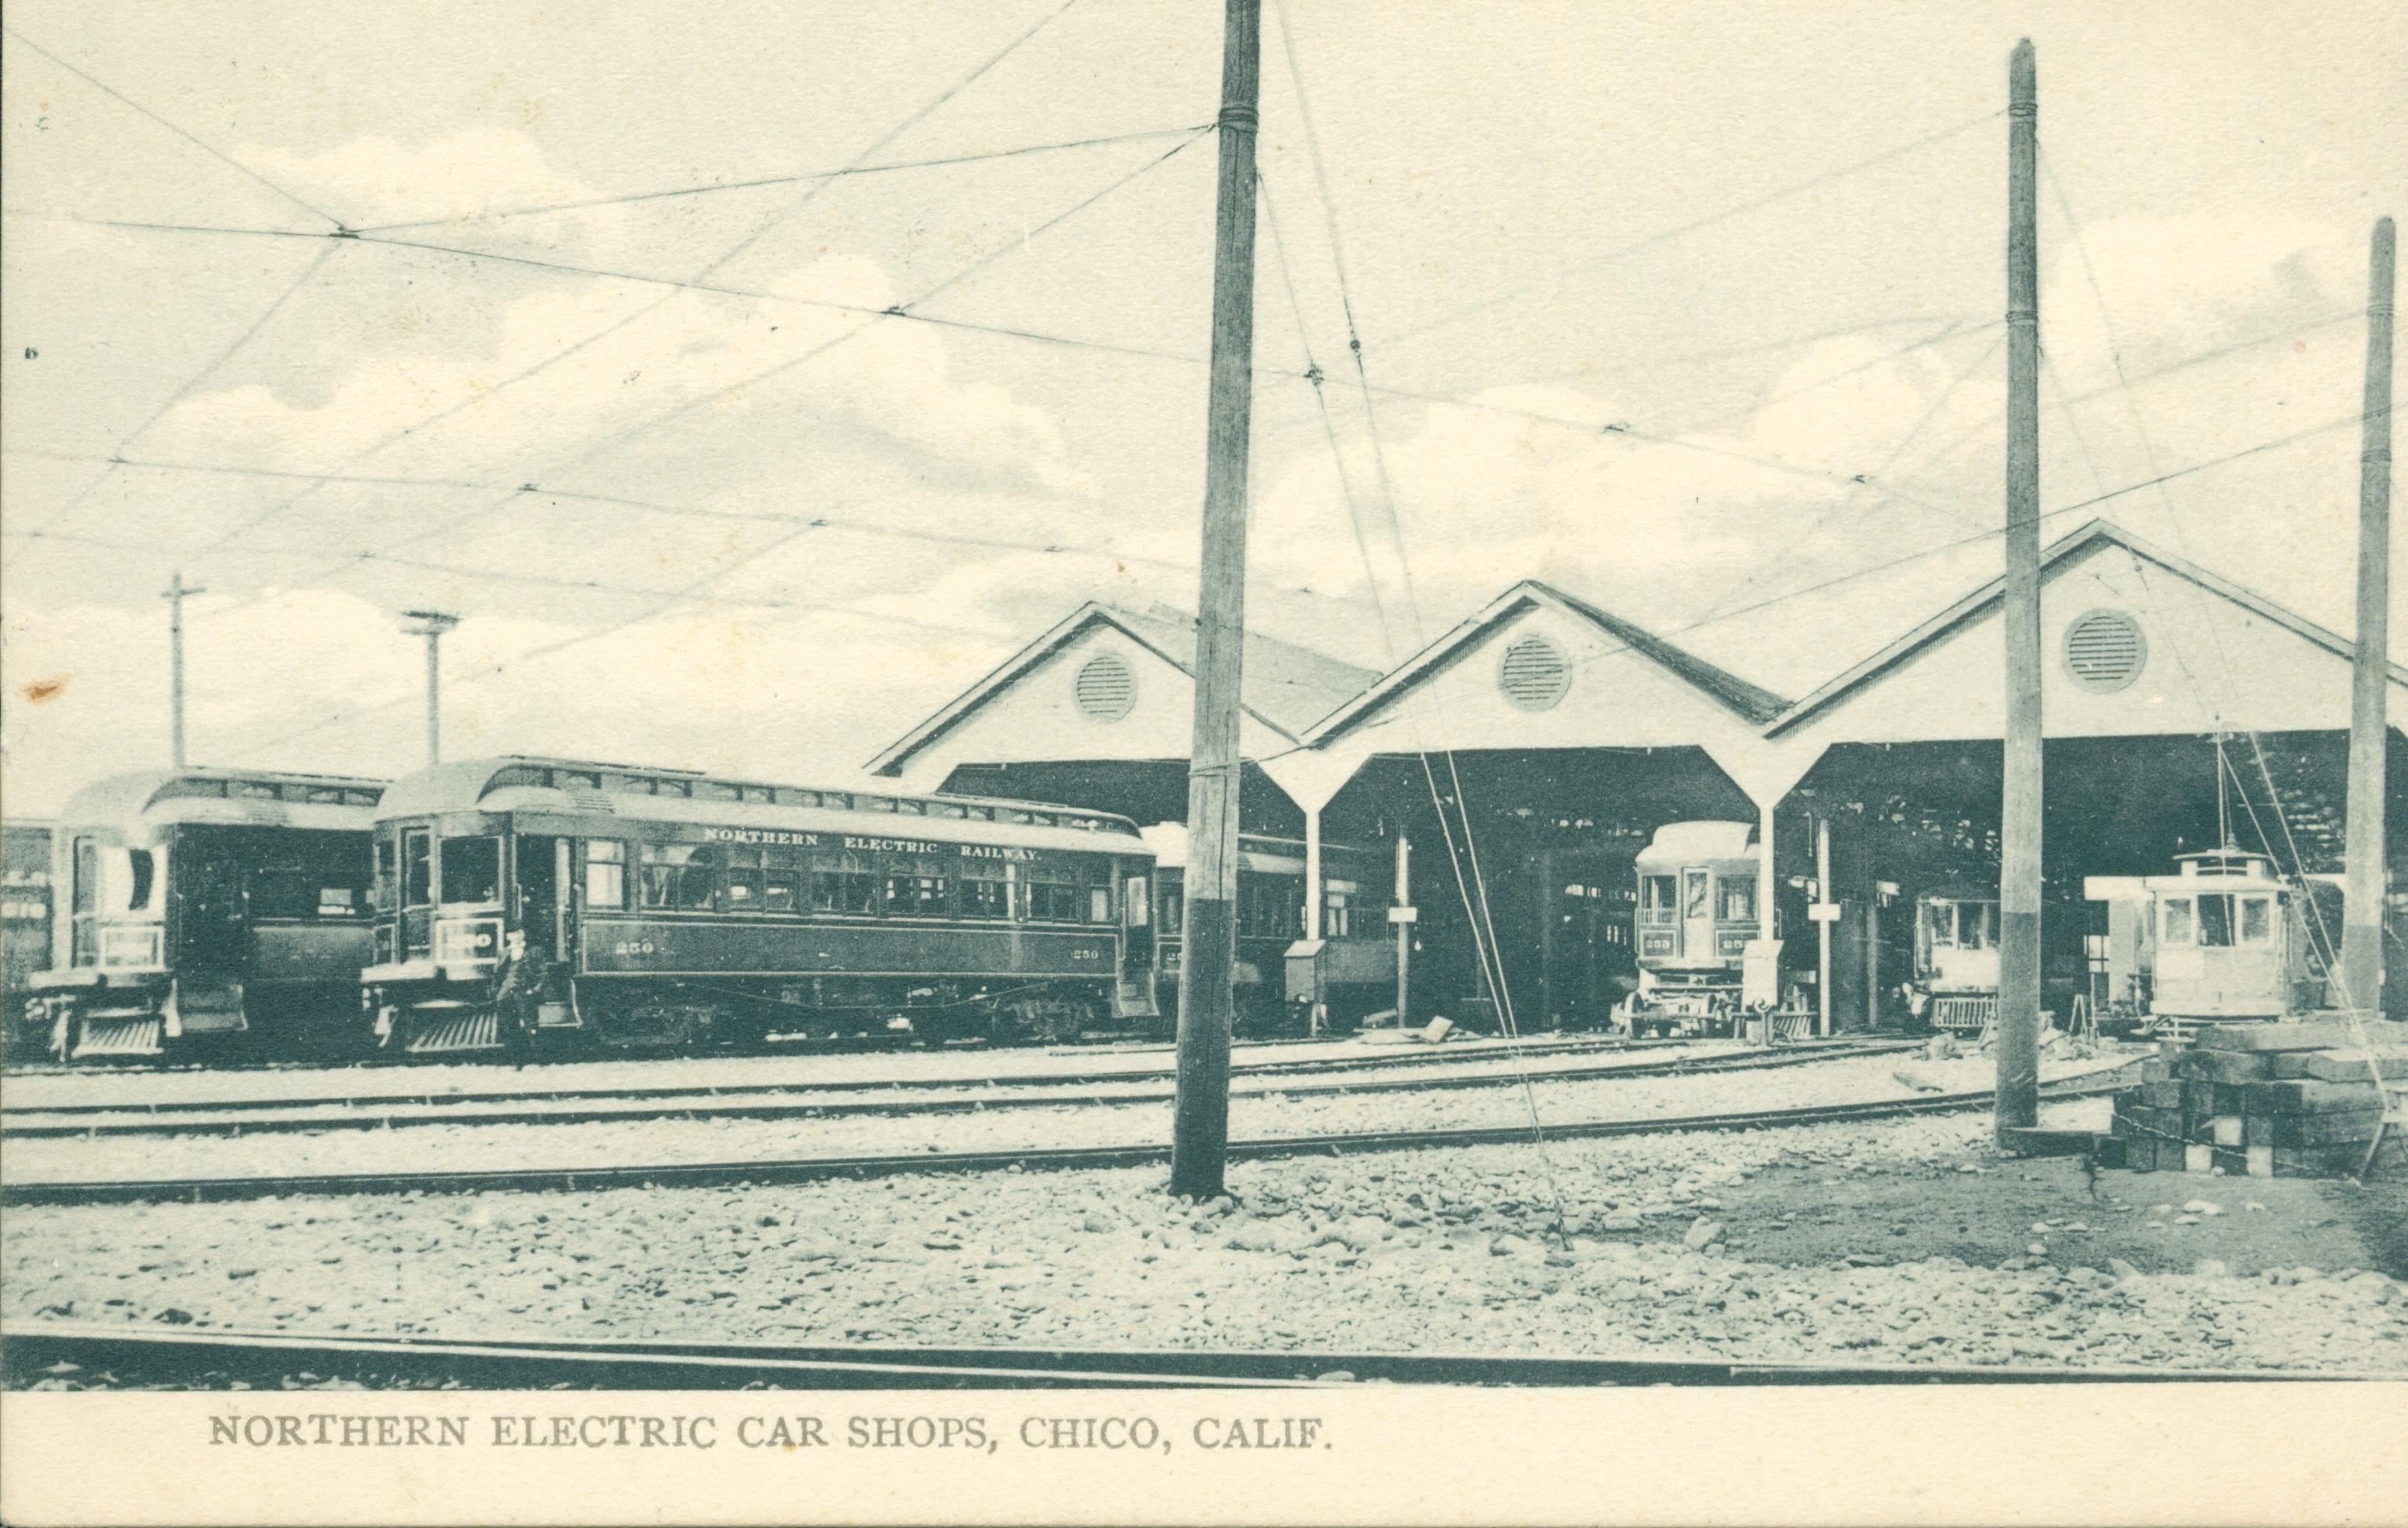 Shows several railcars and sheds